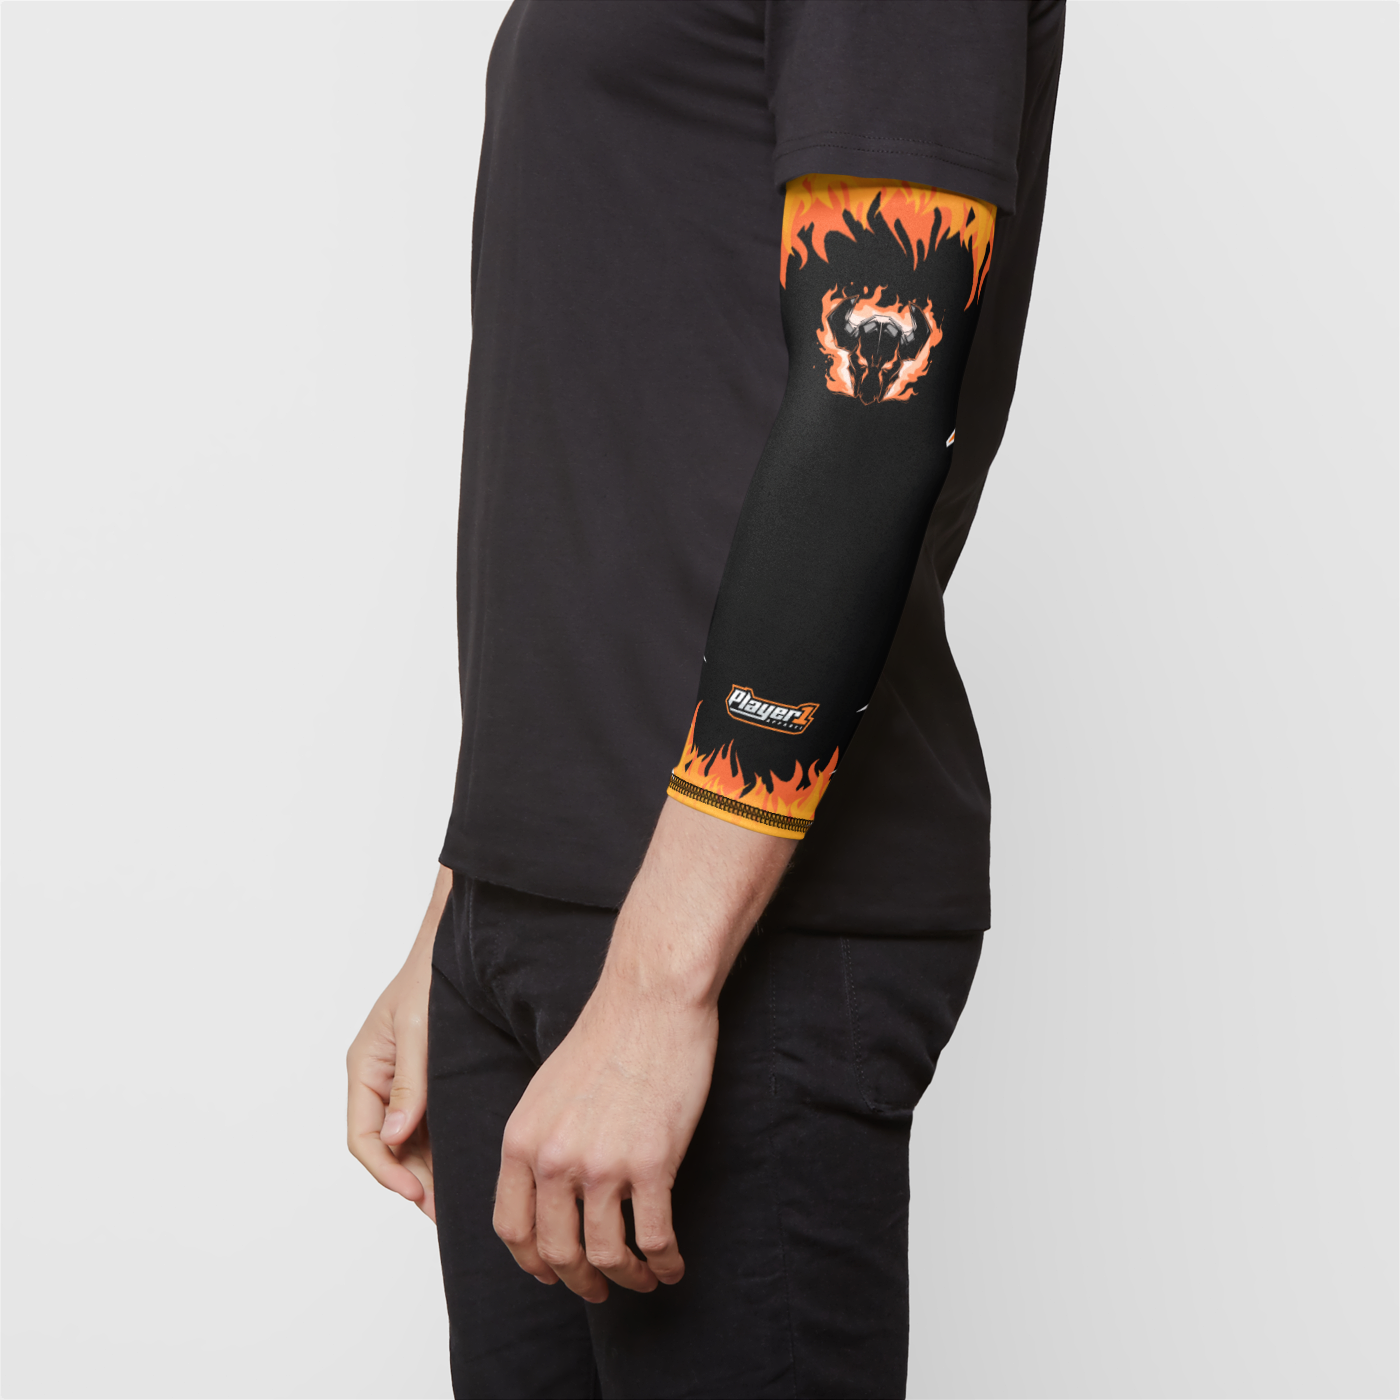 Mr Florian Compression Gaming Sleeve